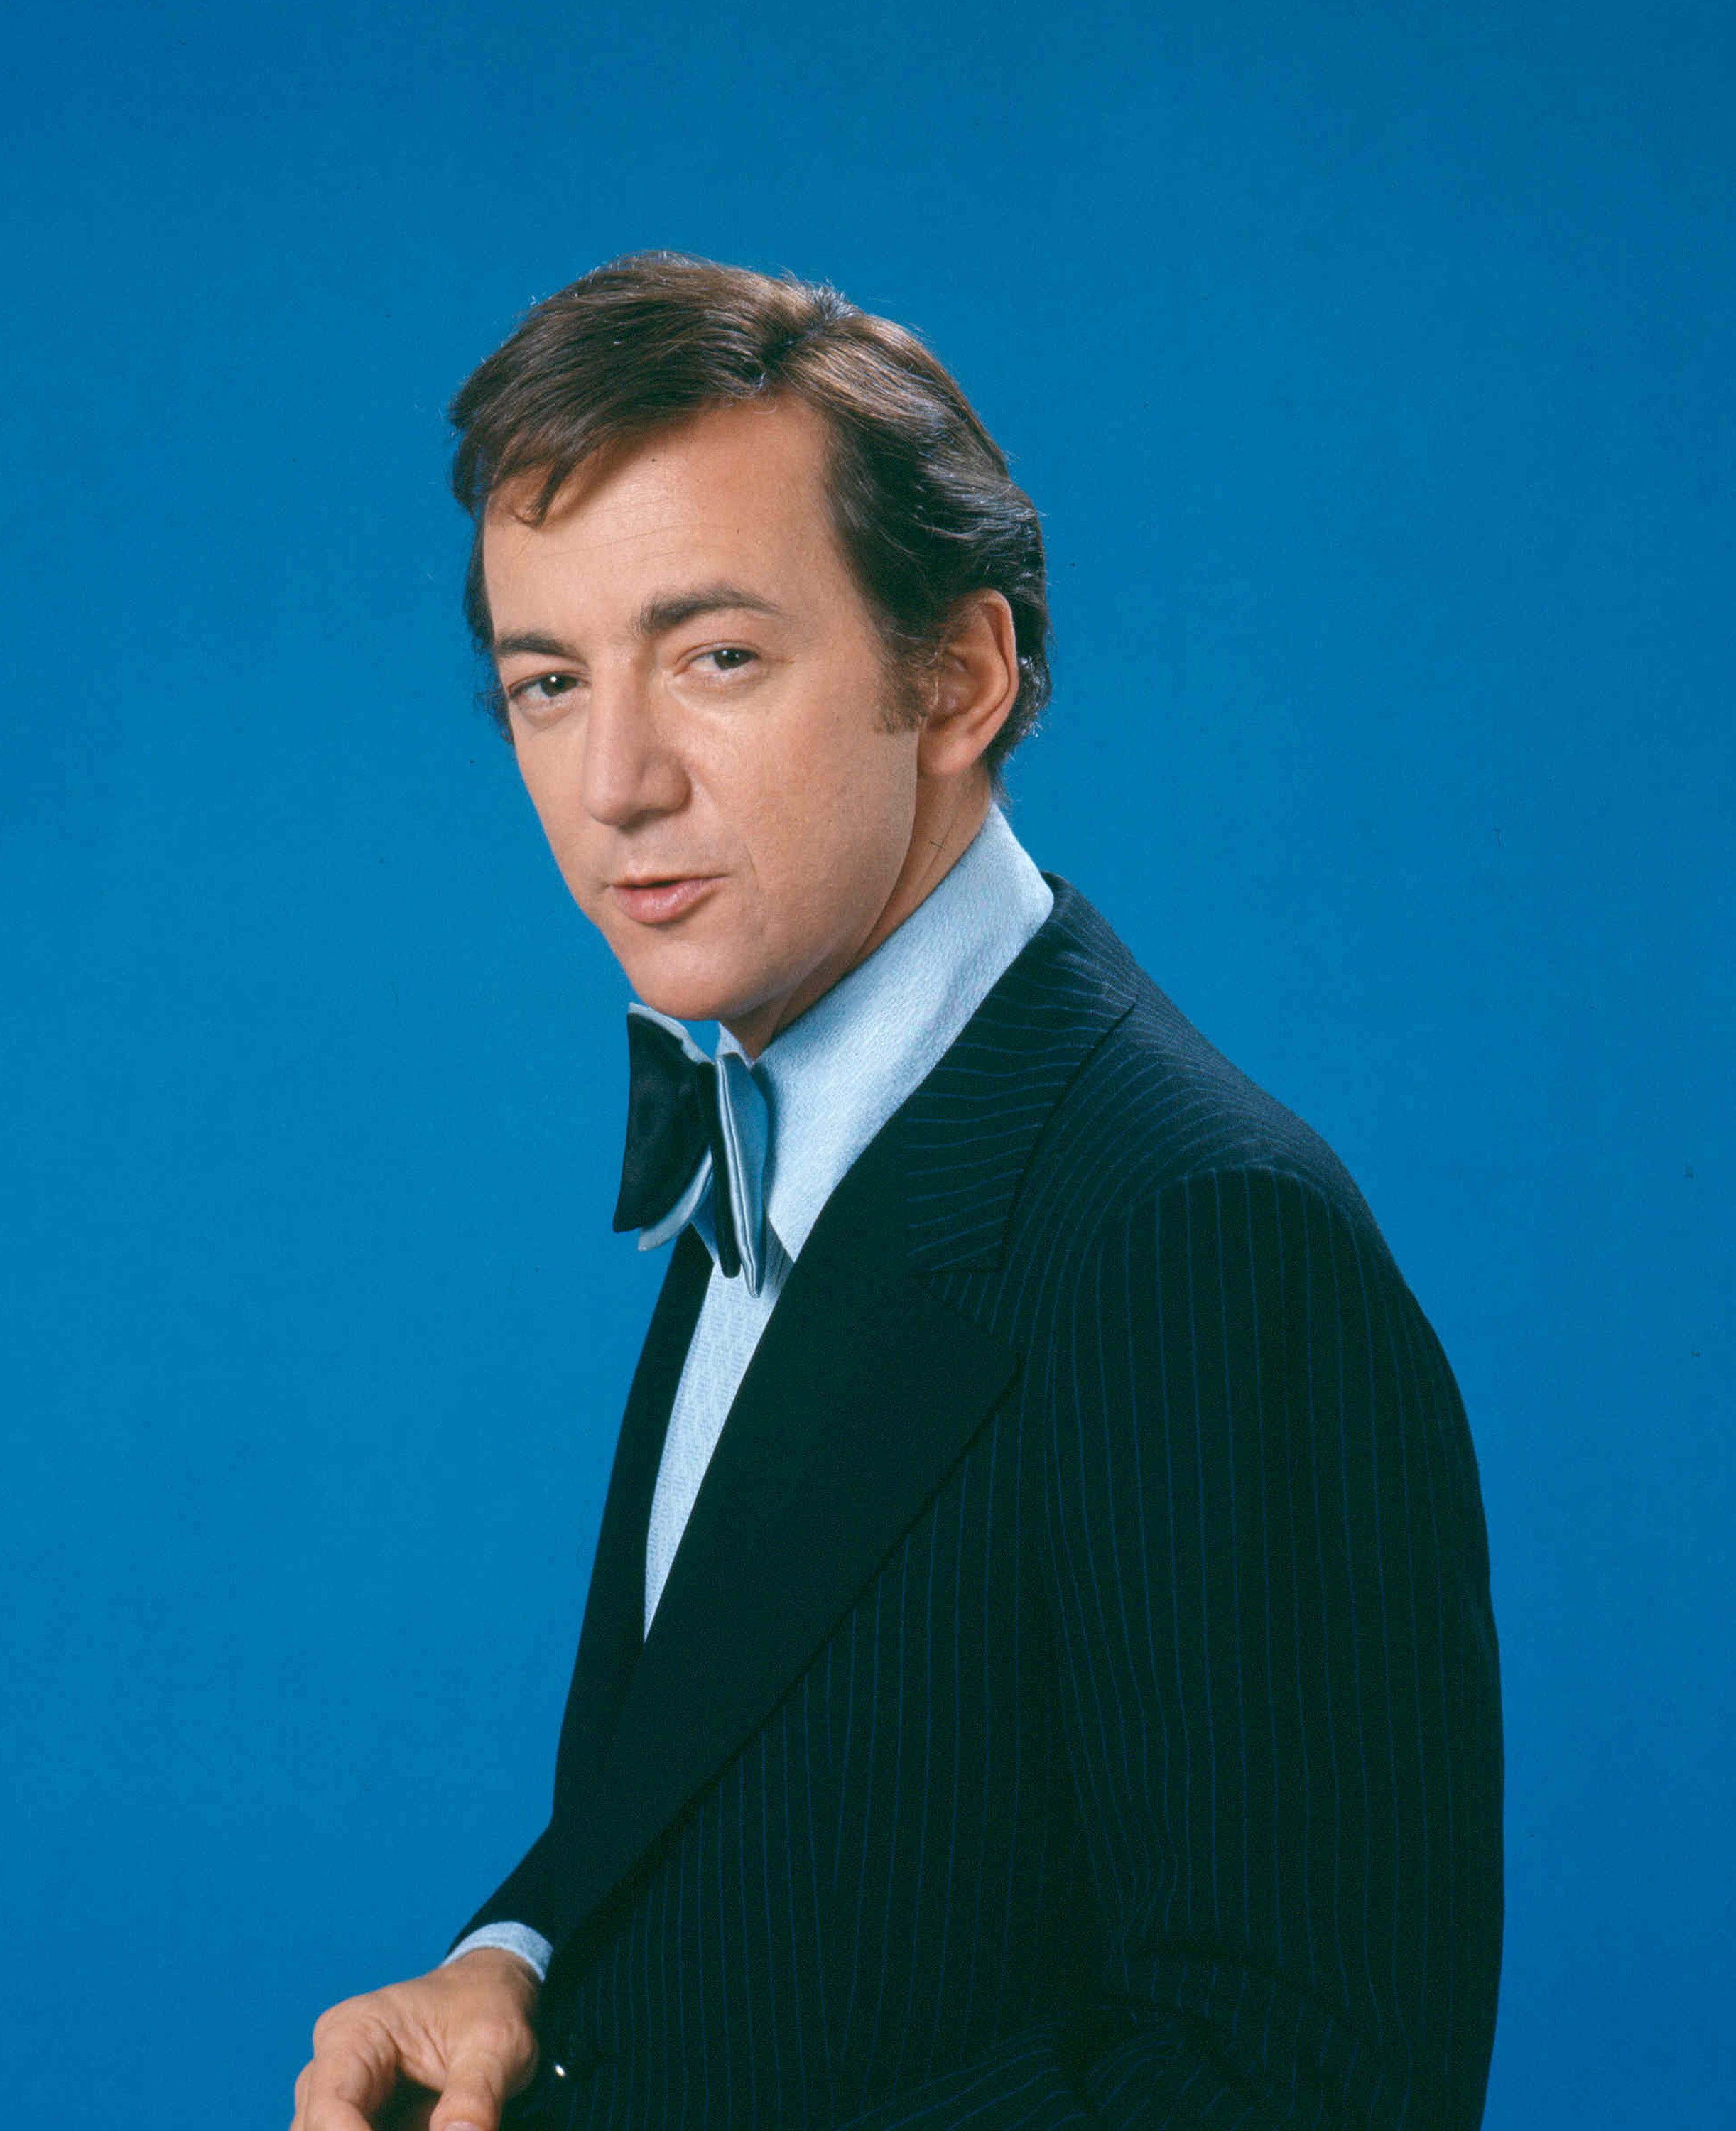 Portrait of Bobby Darin circa 1965 | Source: Getty Images